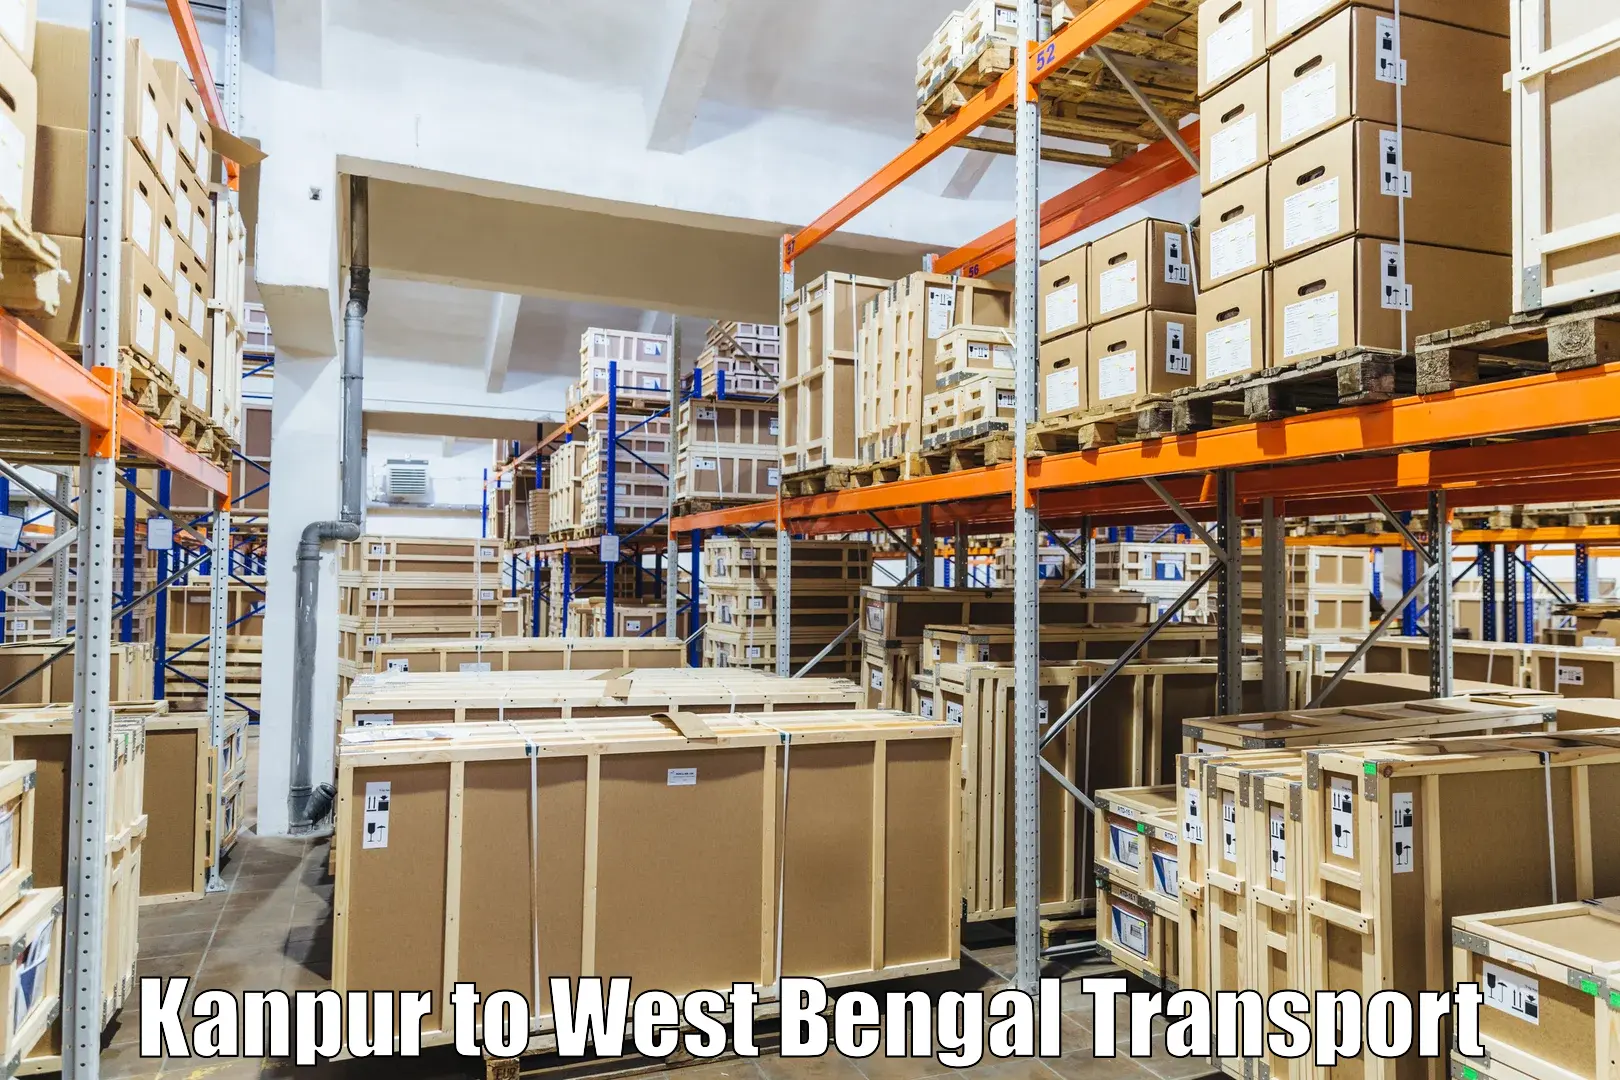 Delivery service Kanpur to West Bengal